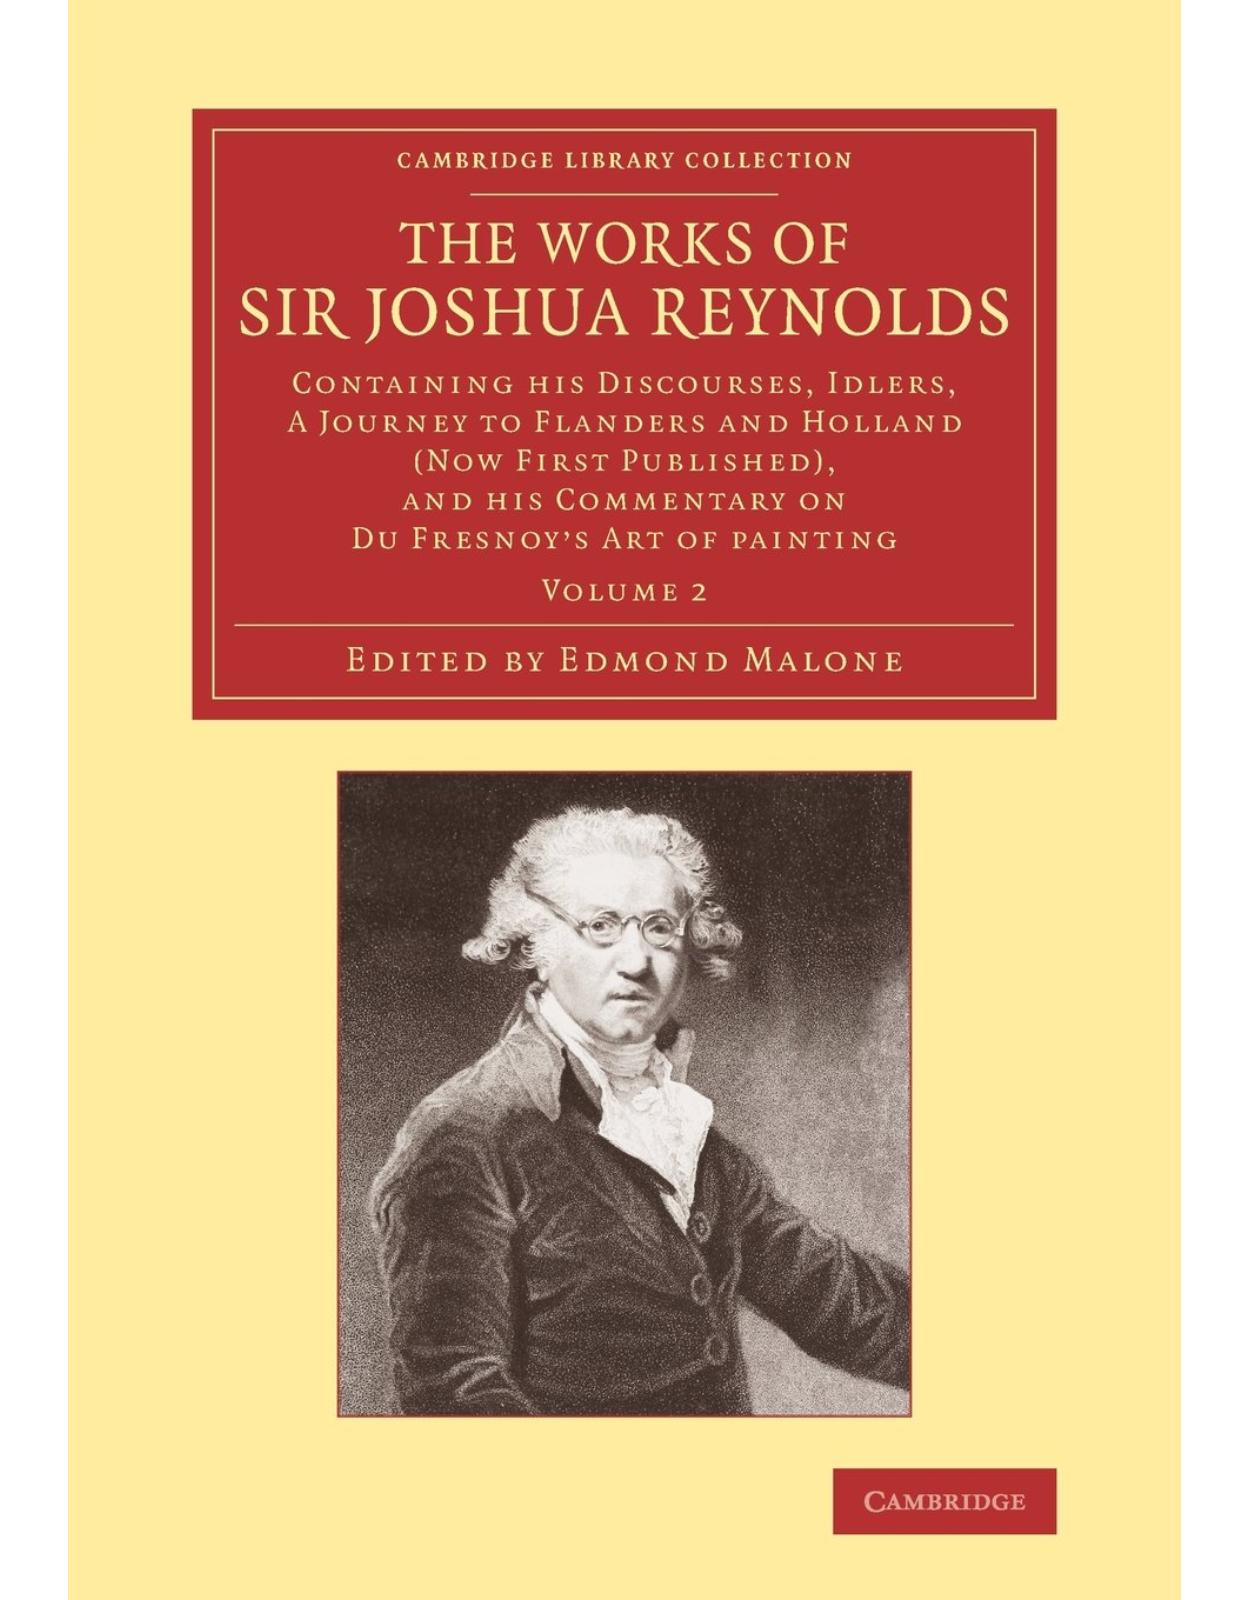 The Works of Sir Joshua Reynolds: Volume 2: Containing his  Discourses, Idlers, A Journey to Flanders and Holland  (Now First Published), and his Commentary on Du Fresnoy's 'Art of Painting'